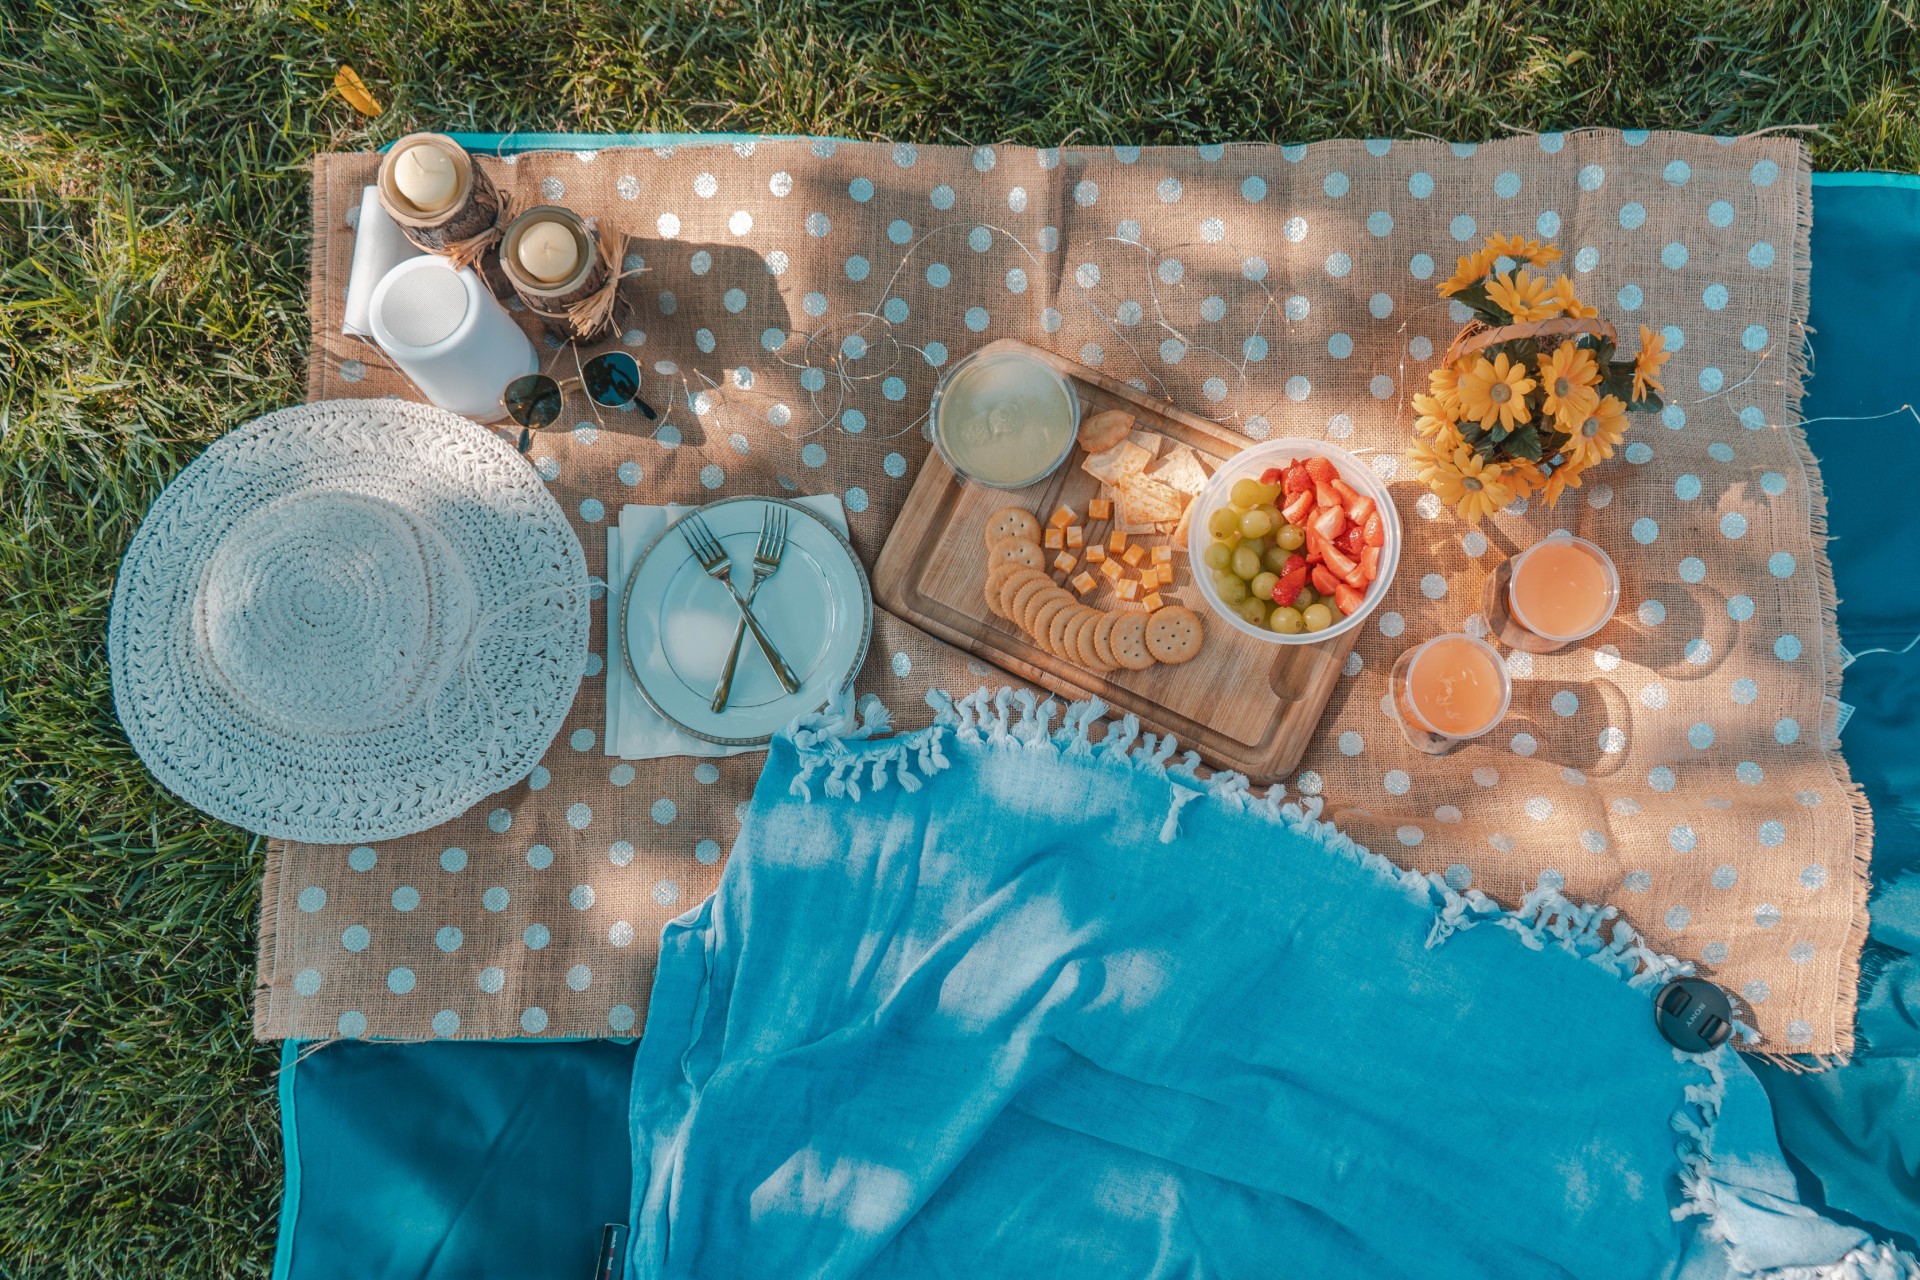 picnic blanket in the shade with food and drinks